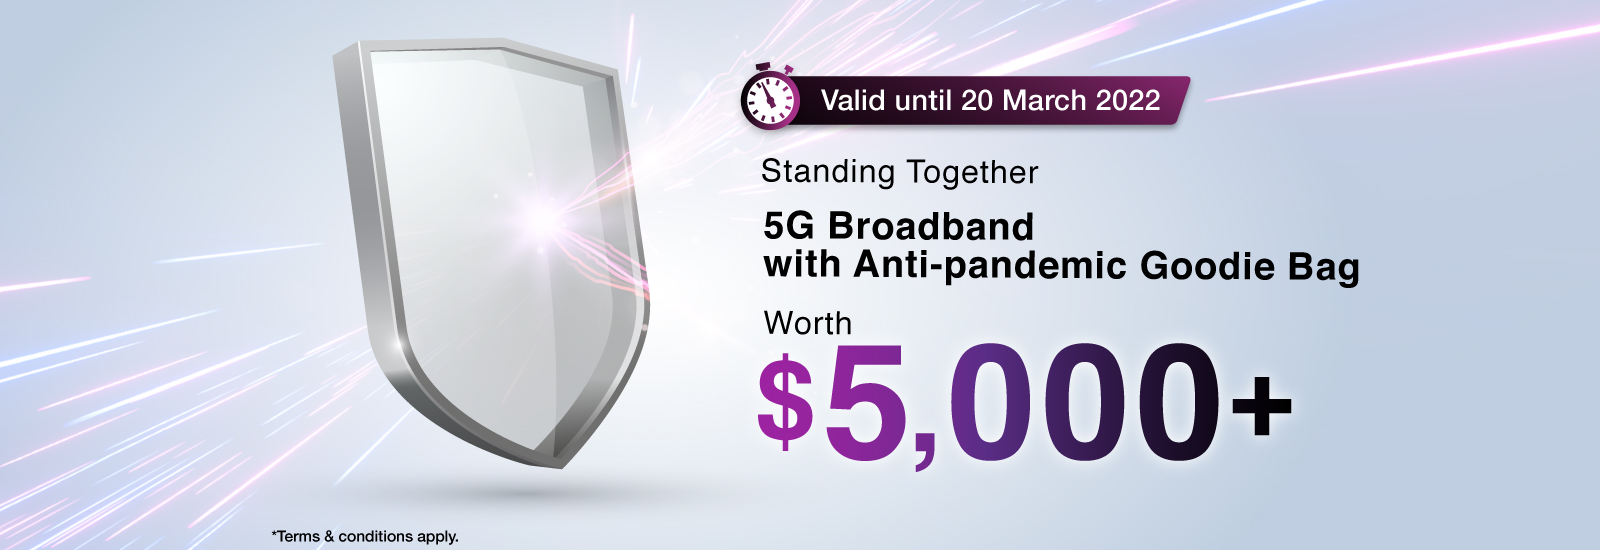 5G Broadband with Anti-epidemic Goody Bag with monthly fee $188. Enjoy Unlimited 5G Broadband at Home & Working Area!